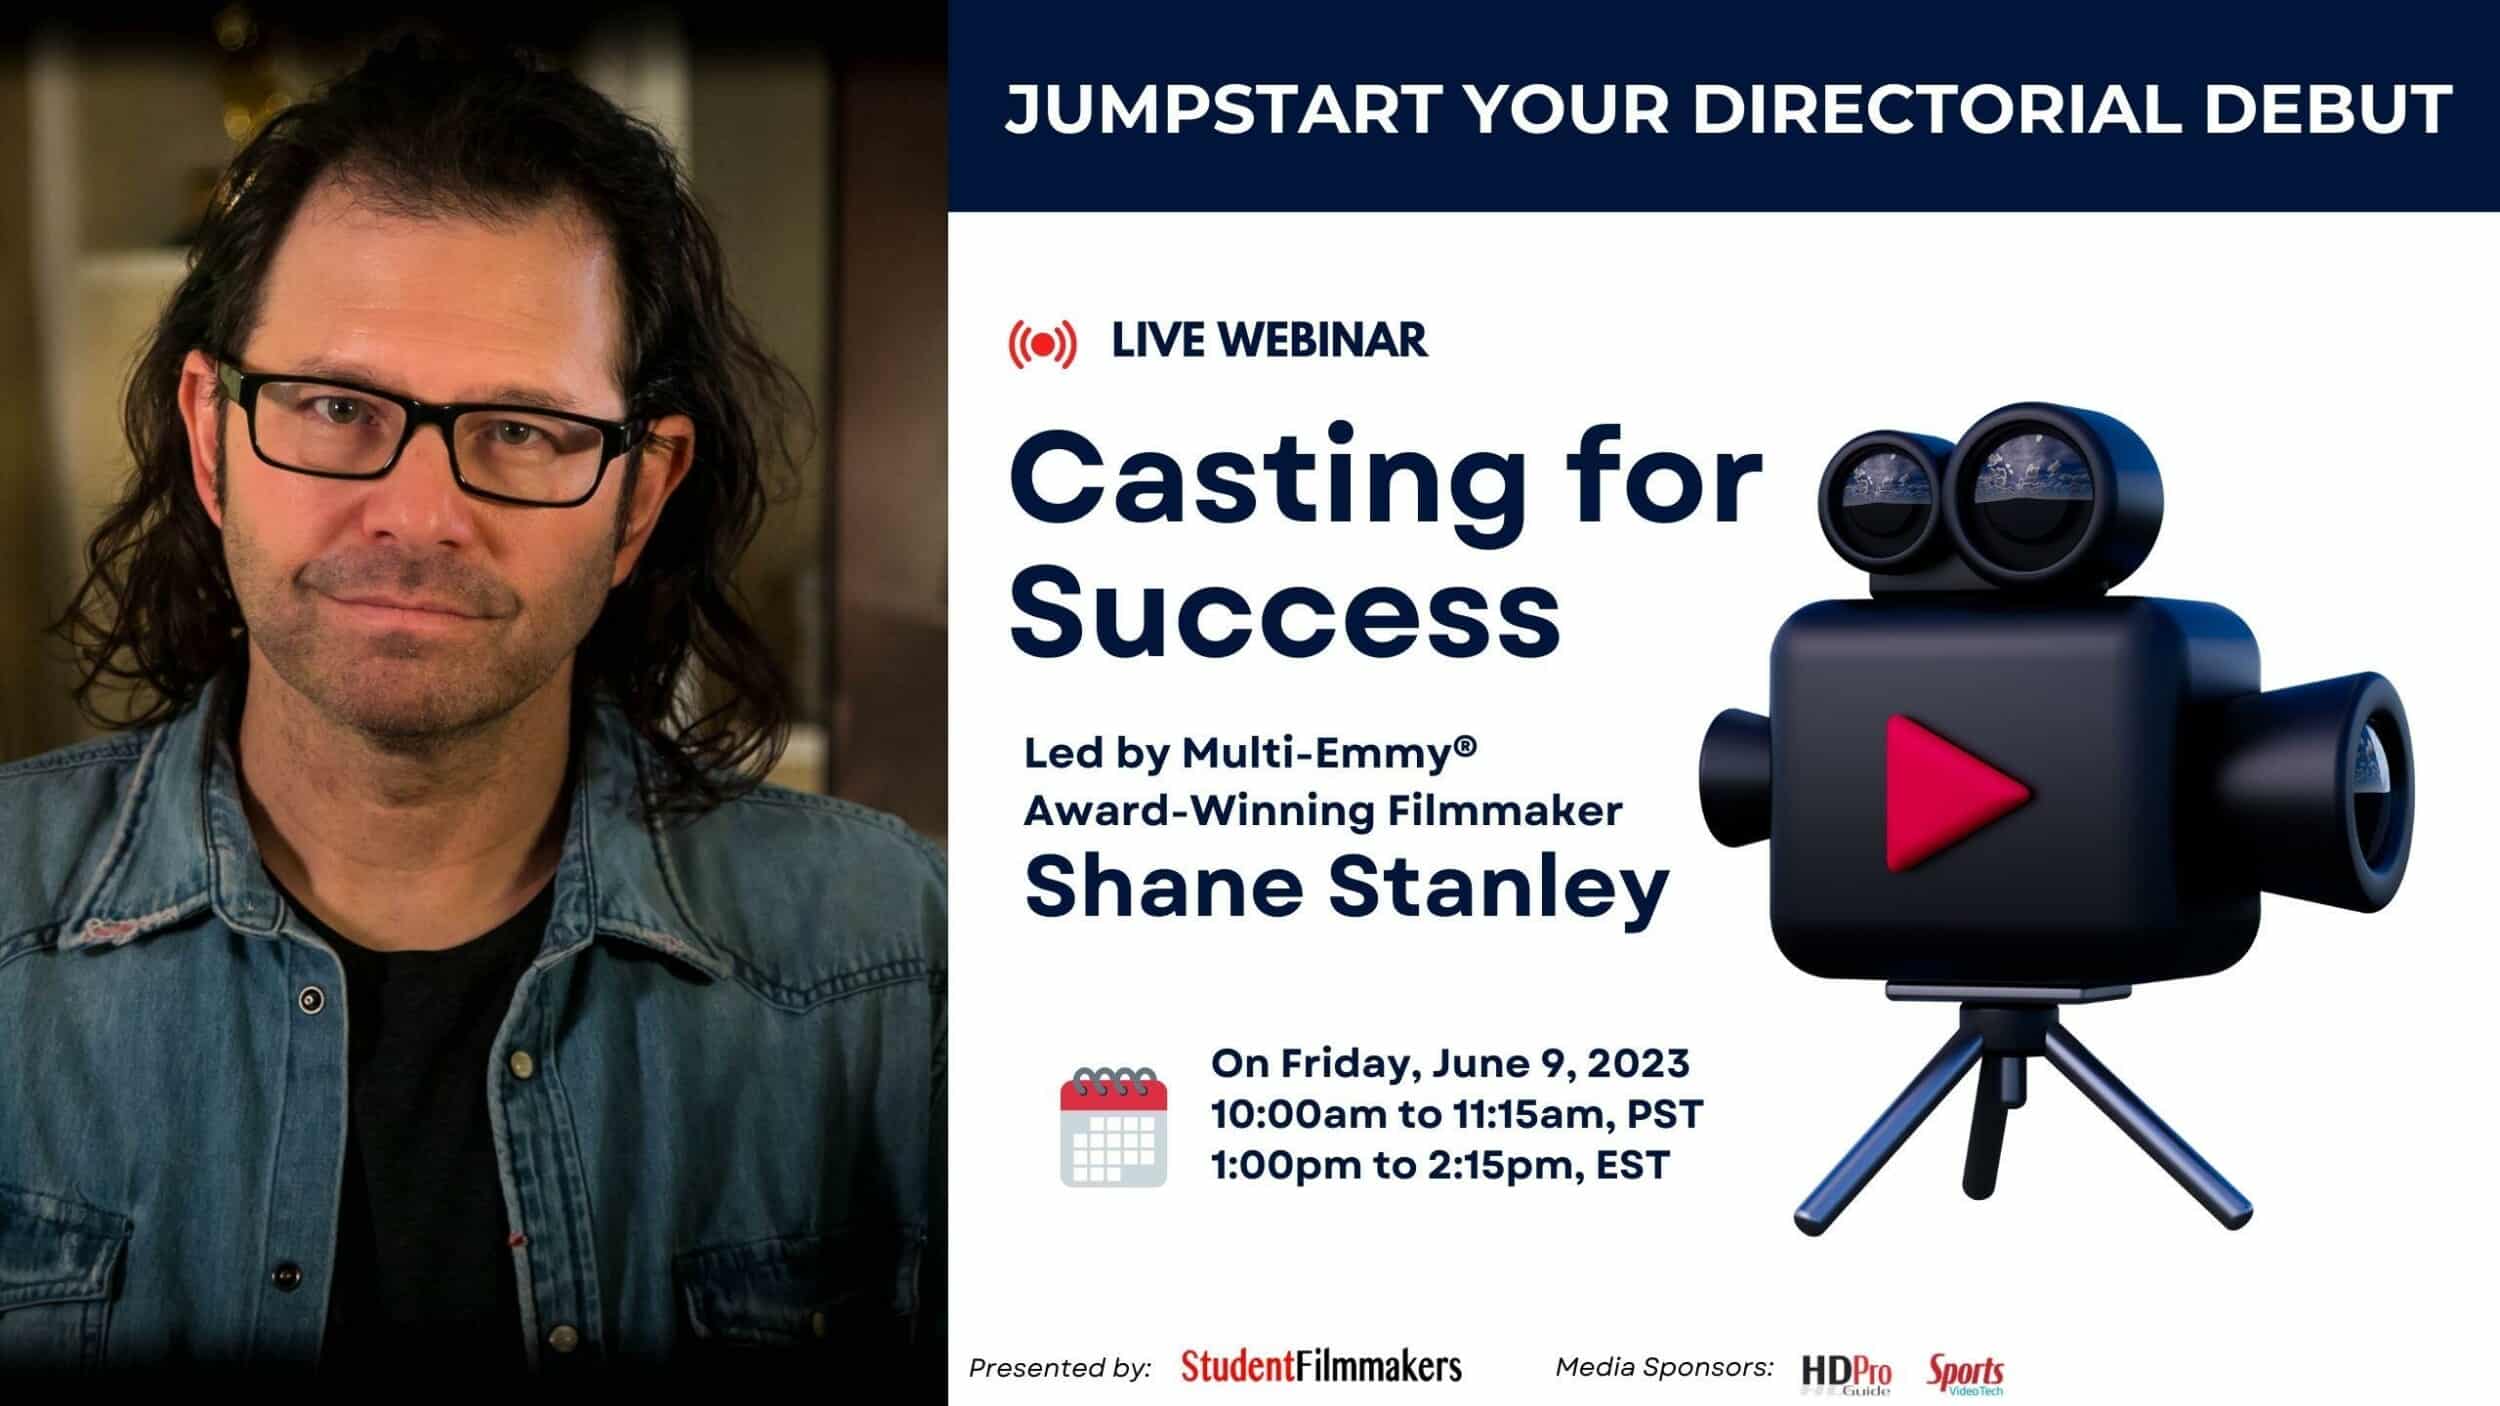 Jumpstart Your Directorial Debut: "Casting for Success" with Shane Stanley